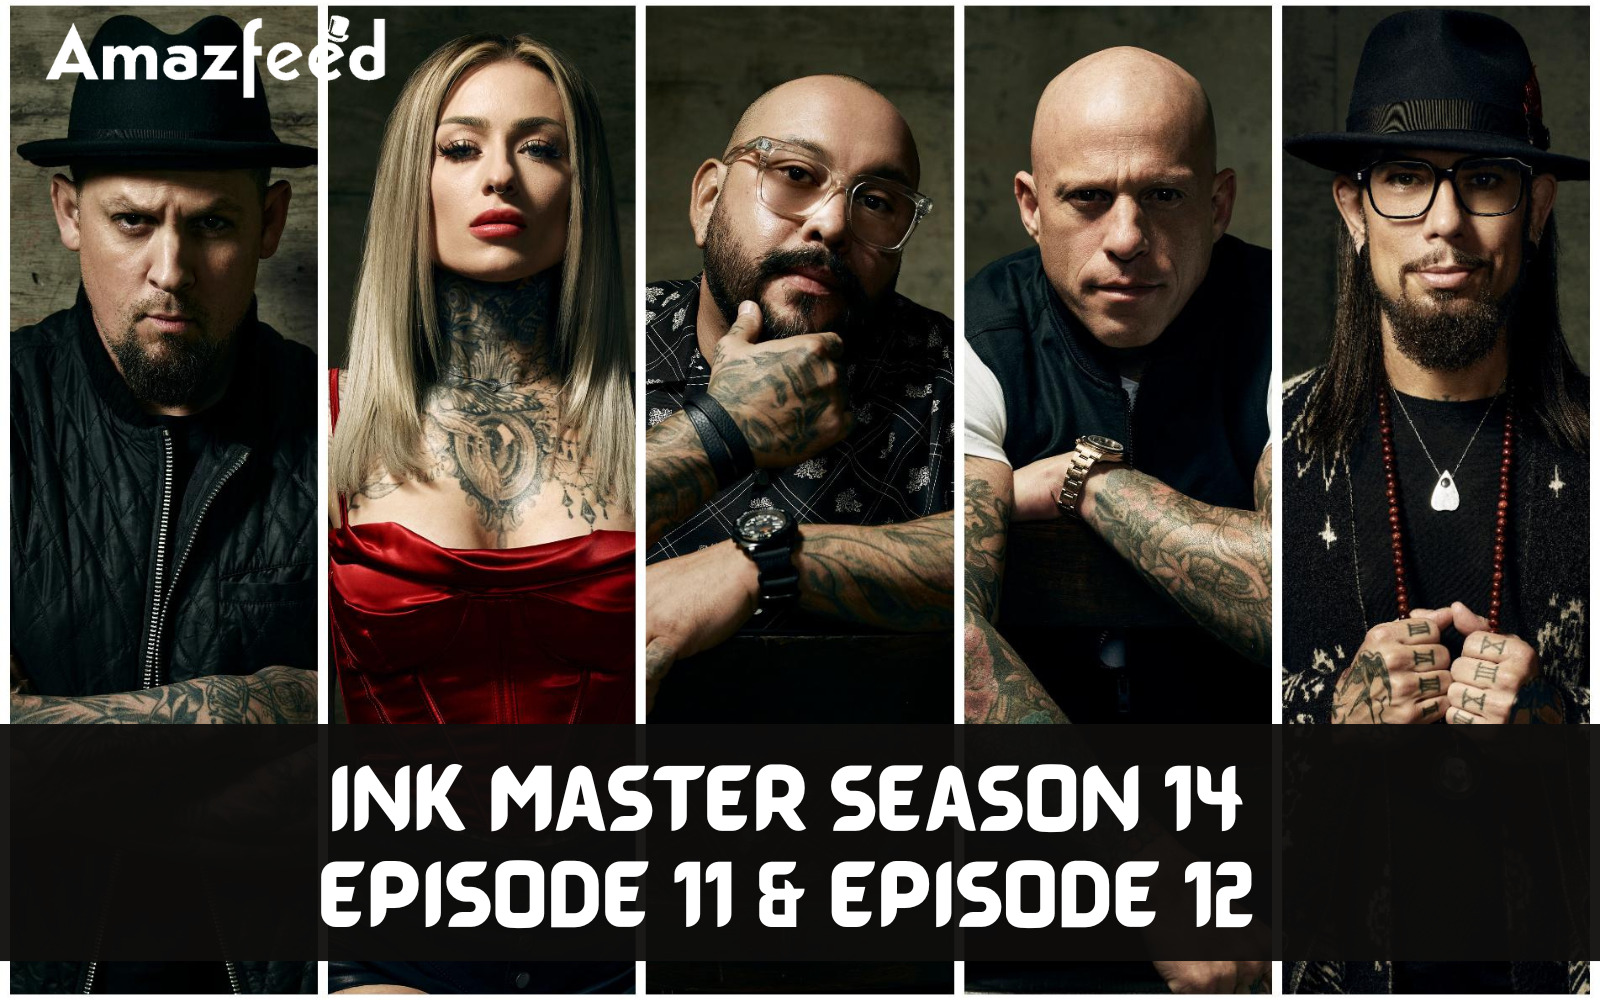 When Is Ink Master season 14 Episode 11 & Episode 12 Coming Out (Release Date)